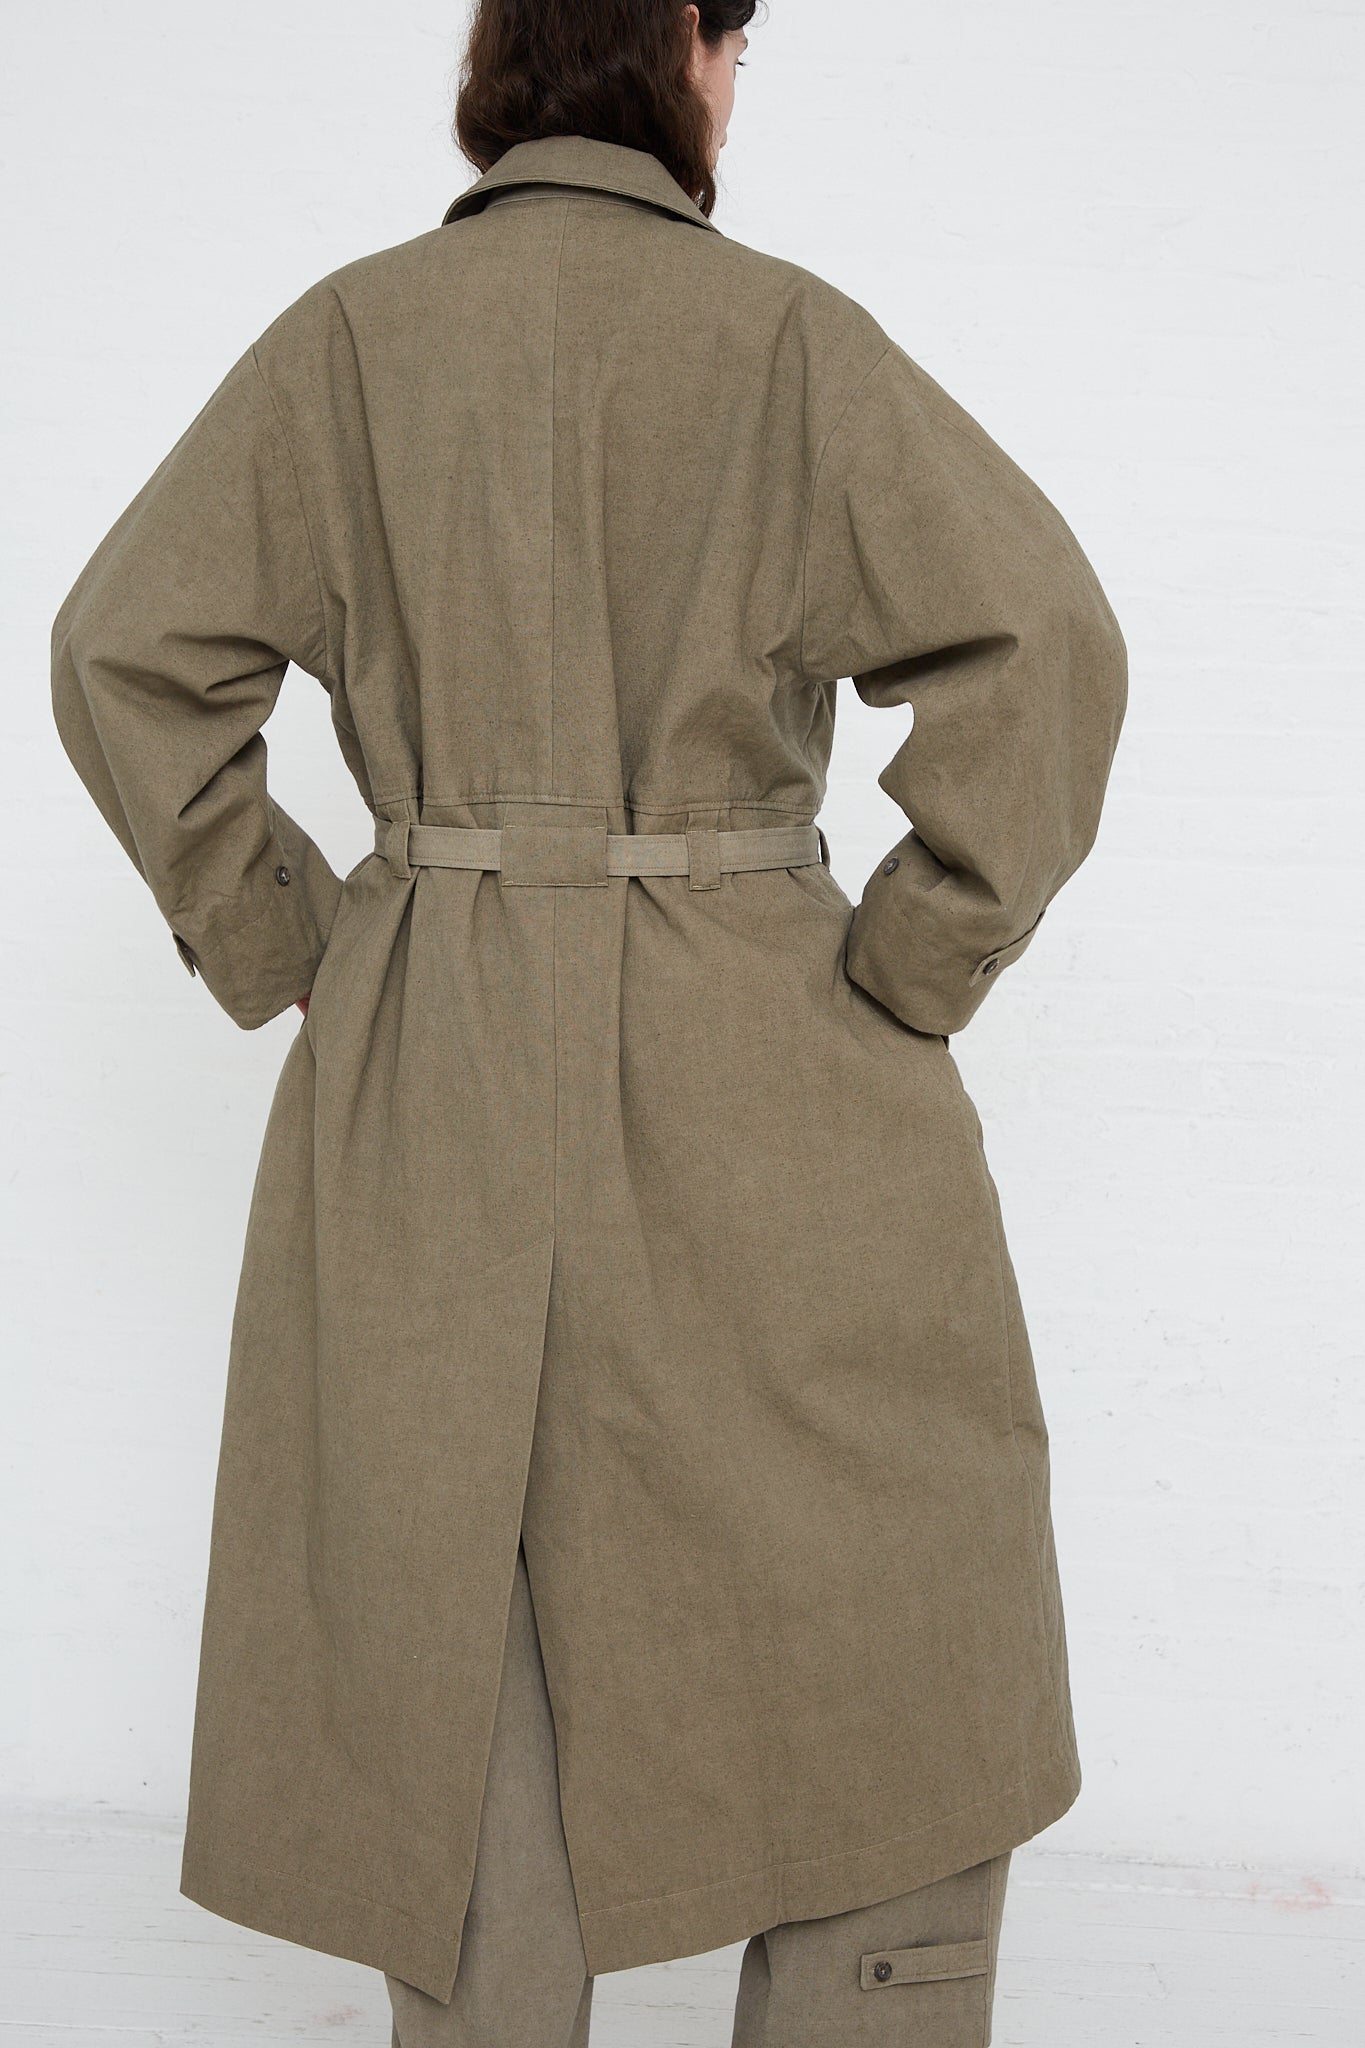 A woman wearing an oversized green Lauren Manoogian Belted Trench in Fatigue made of soft canvas with adjustable cuffs.